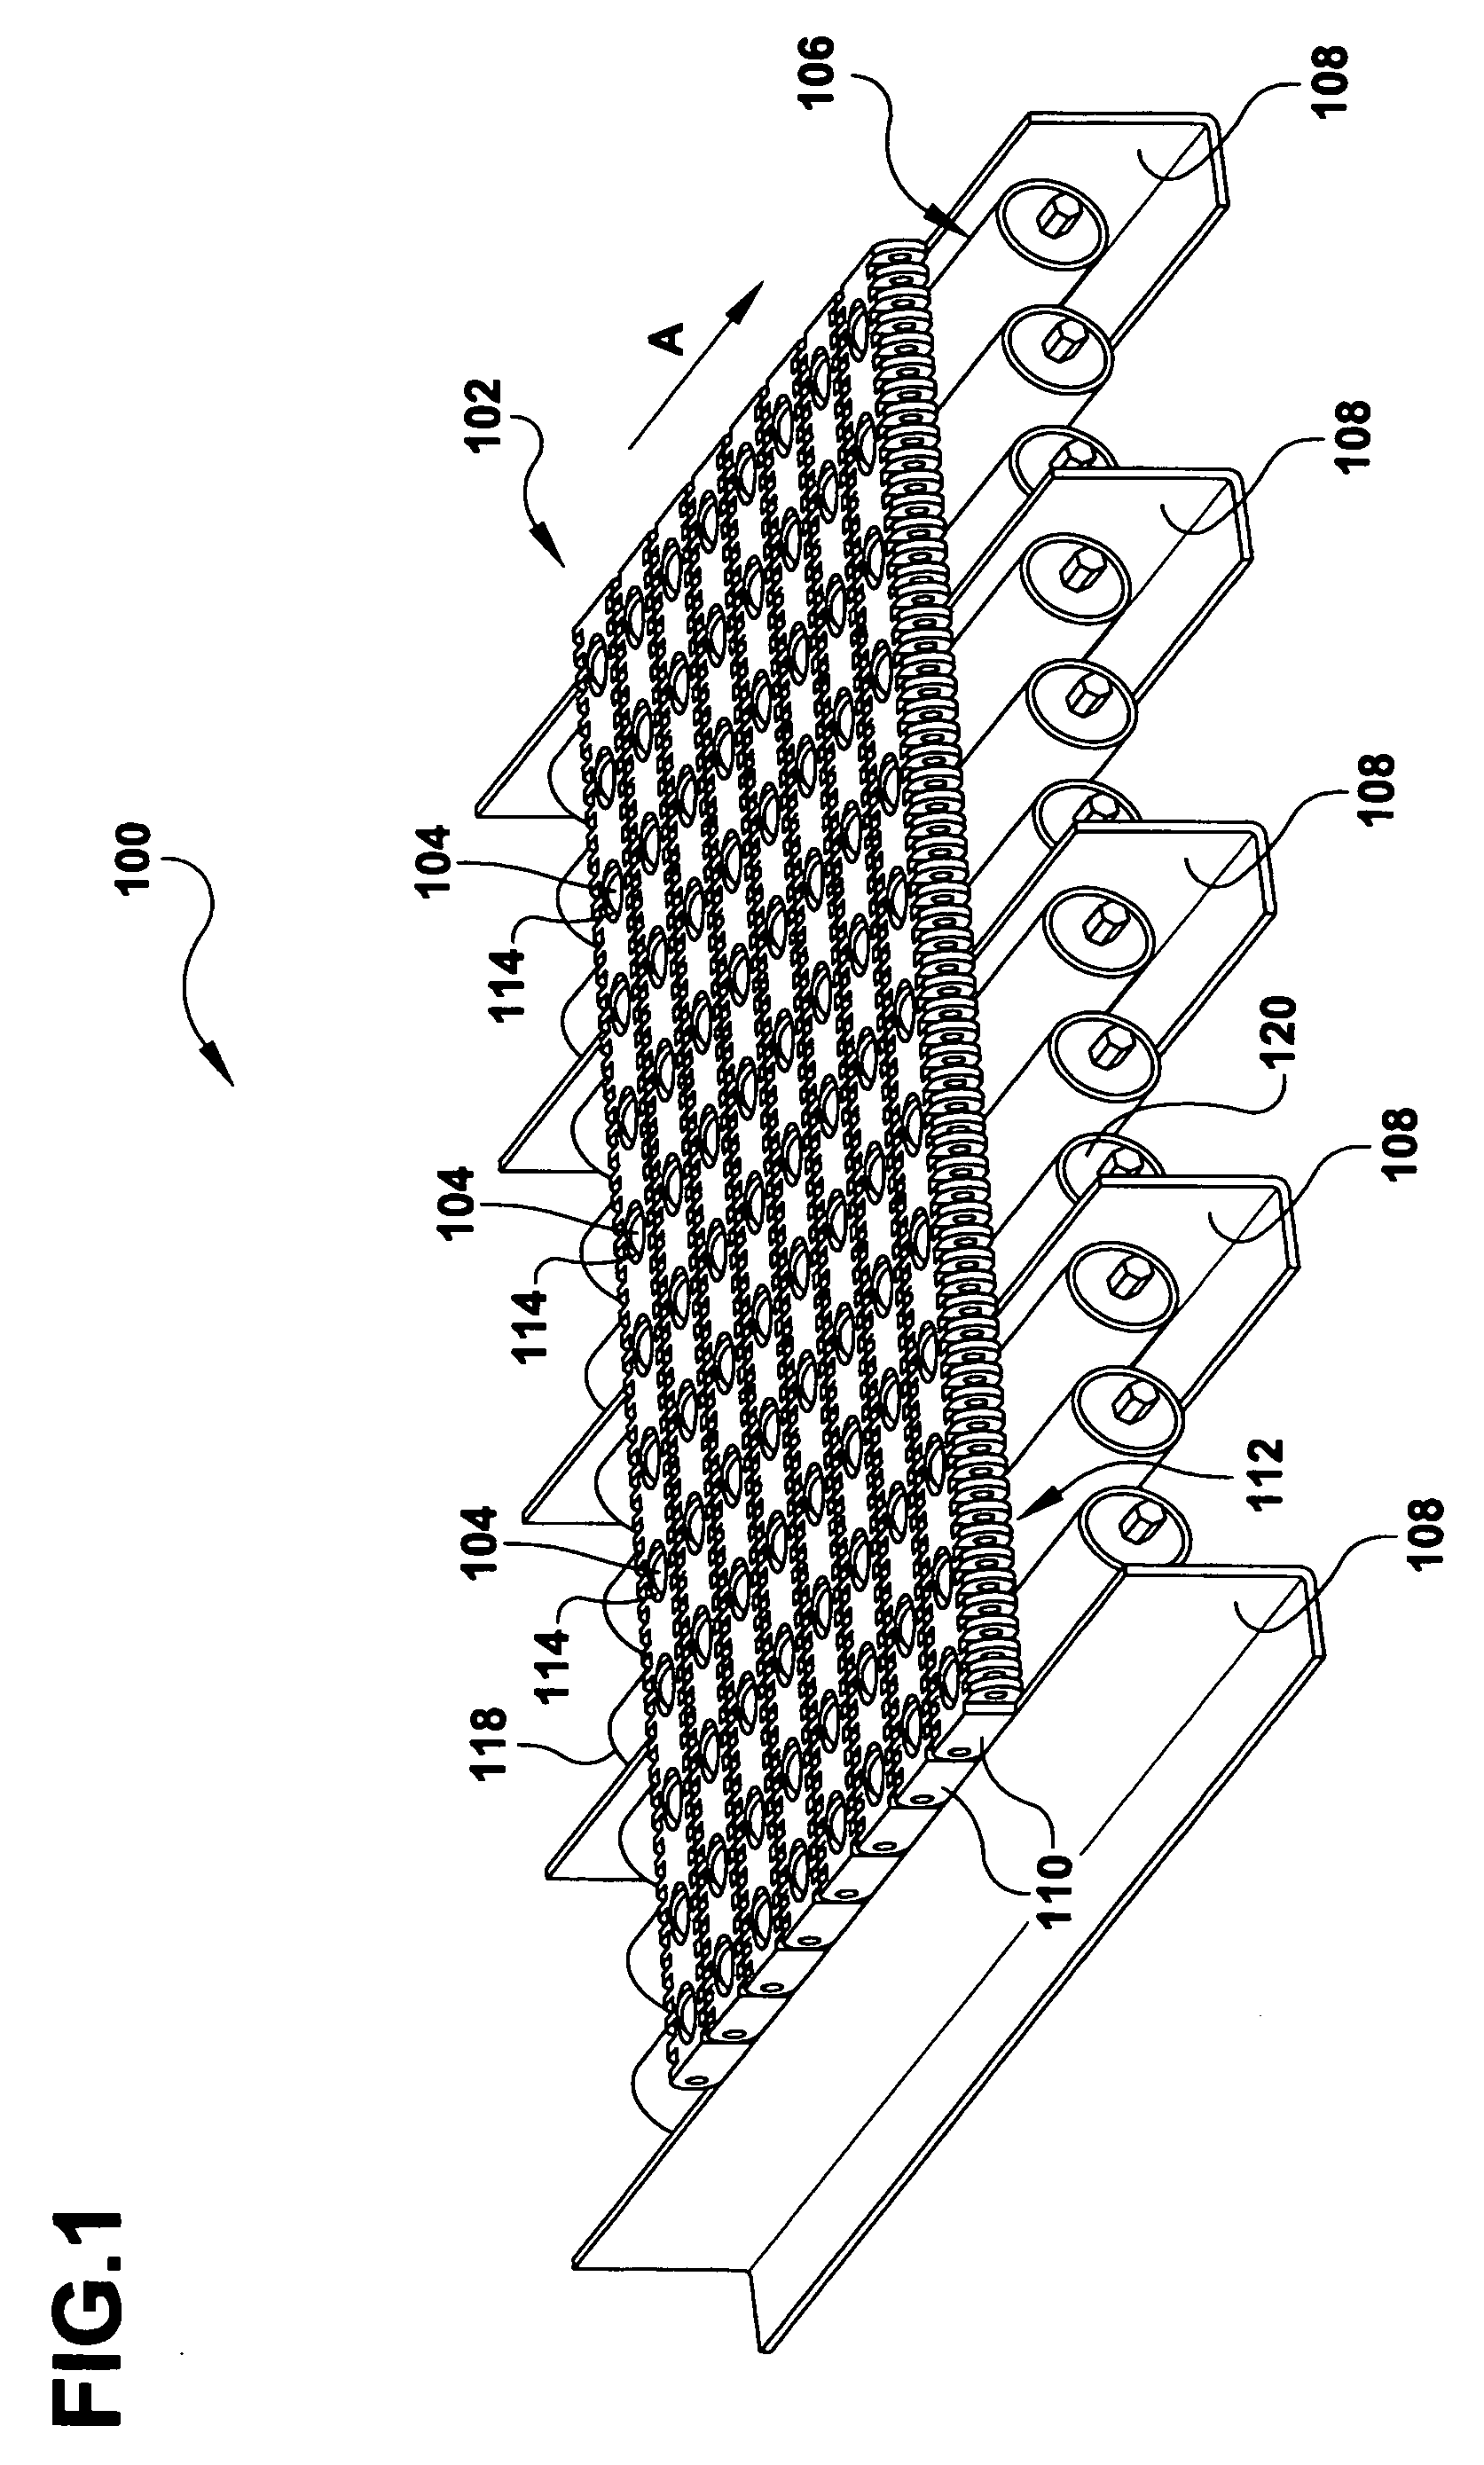 Apparatus and methods for conveying objects